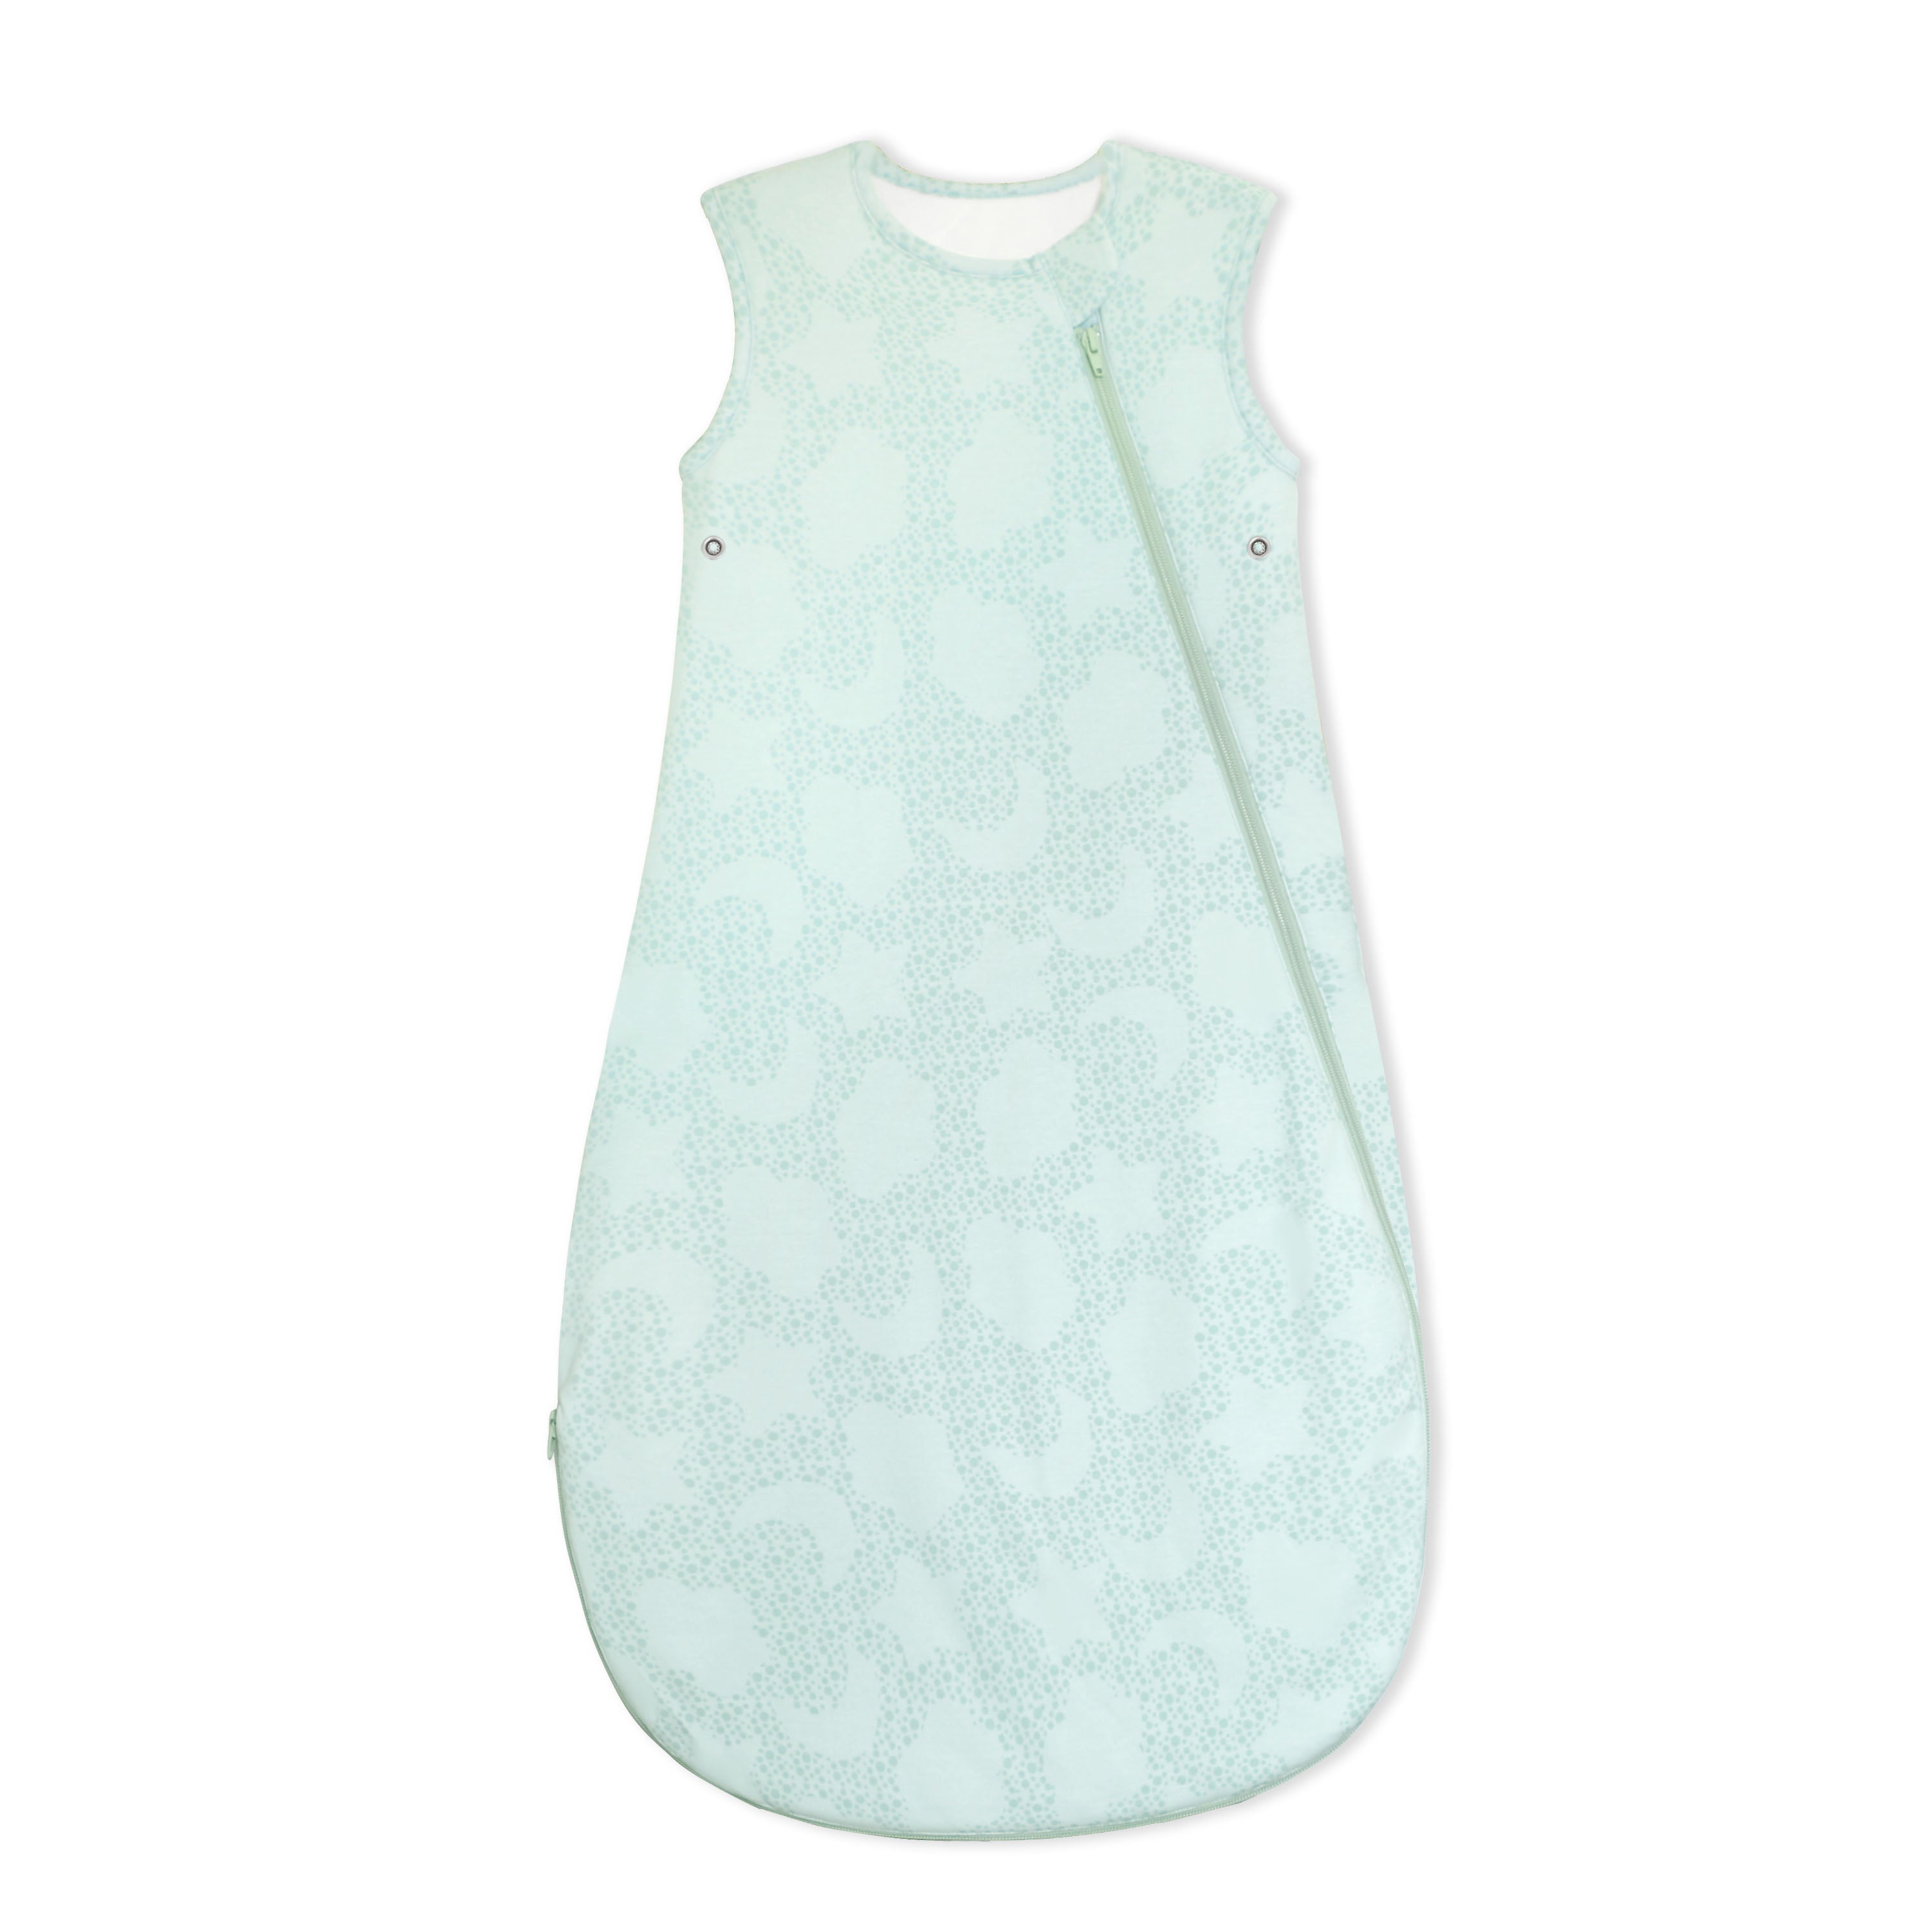 2-in-1 Organic Cotton Zipper Baby Swaddle Up Sack 0.5 TOG - Mint Sky